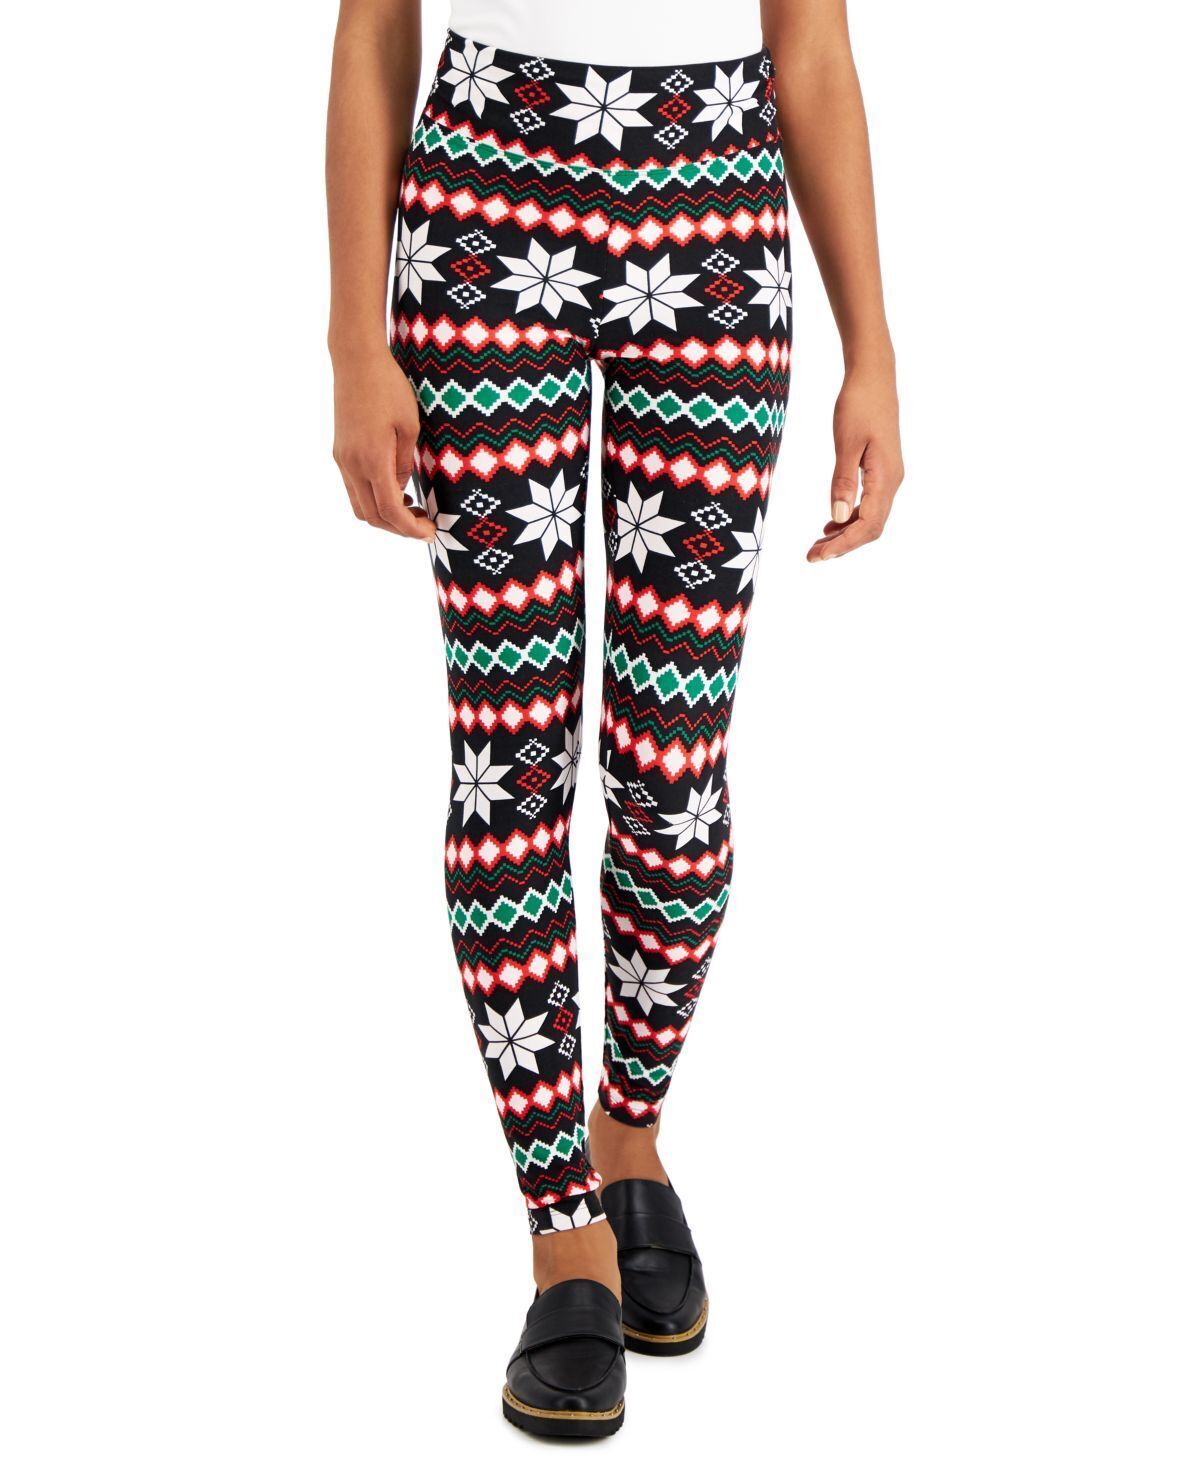 Primary image for Planet Gold Juniors Holiday Printed Leggings,Multi Fairisle,X-Small